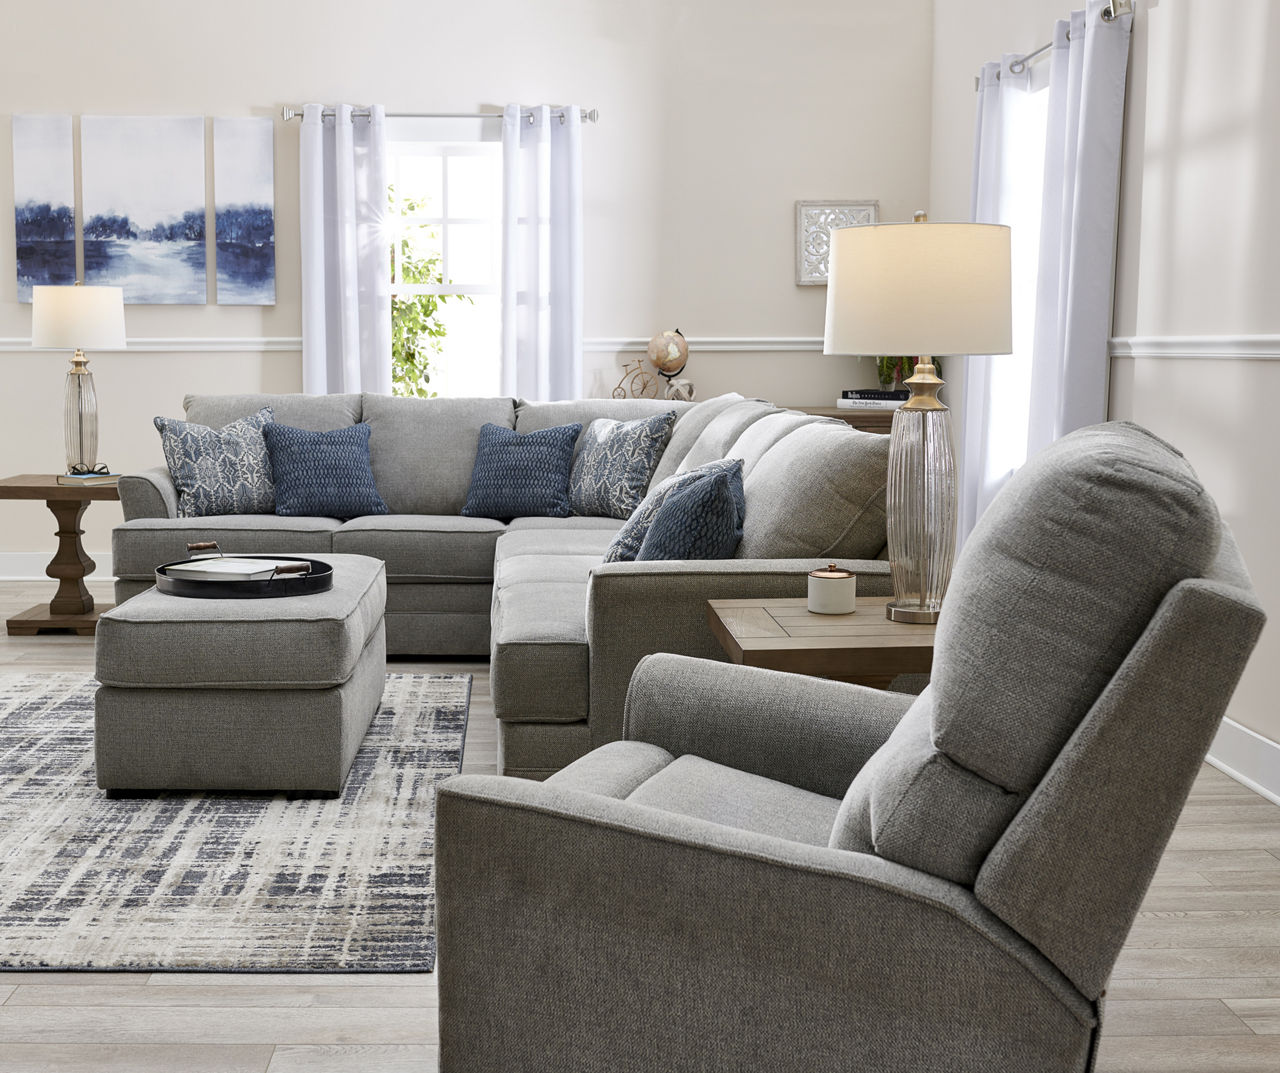 Broyhill Naples Living Room Collection Big Lots